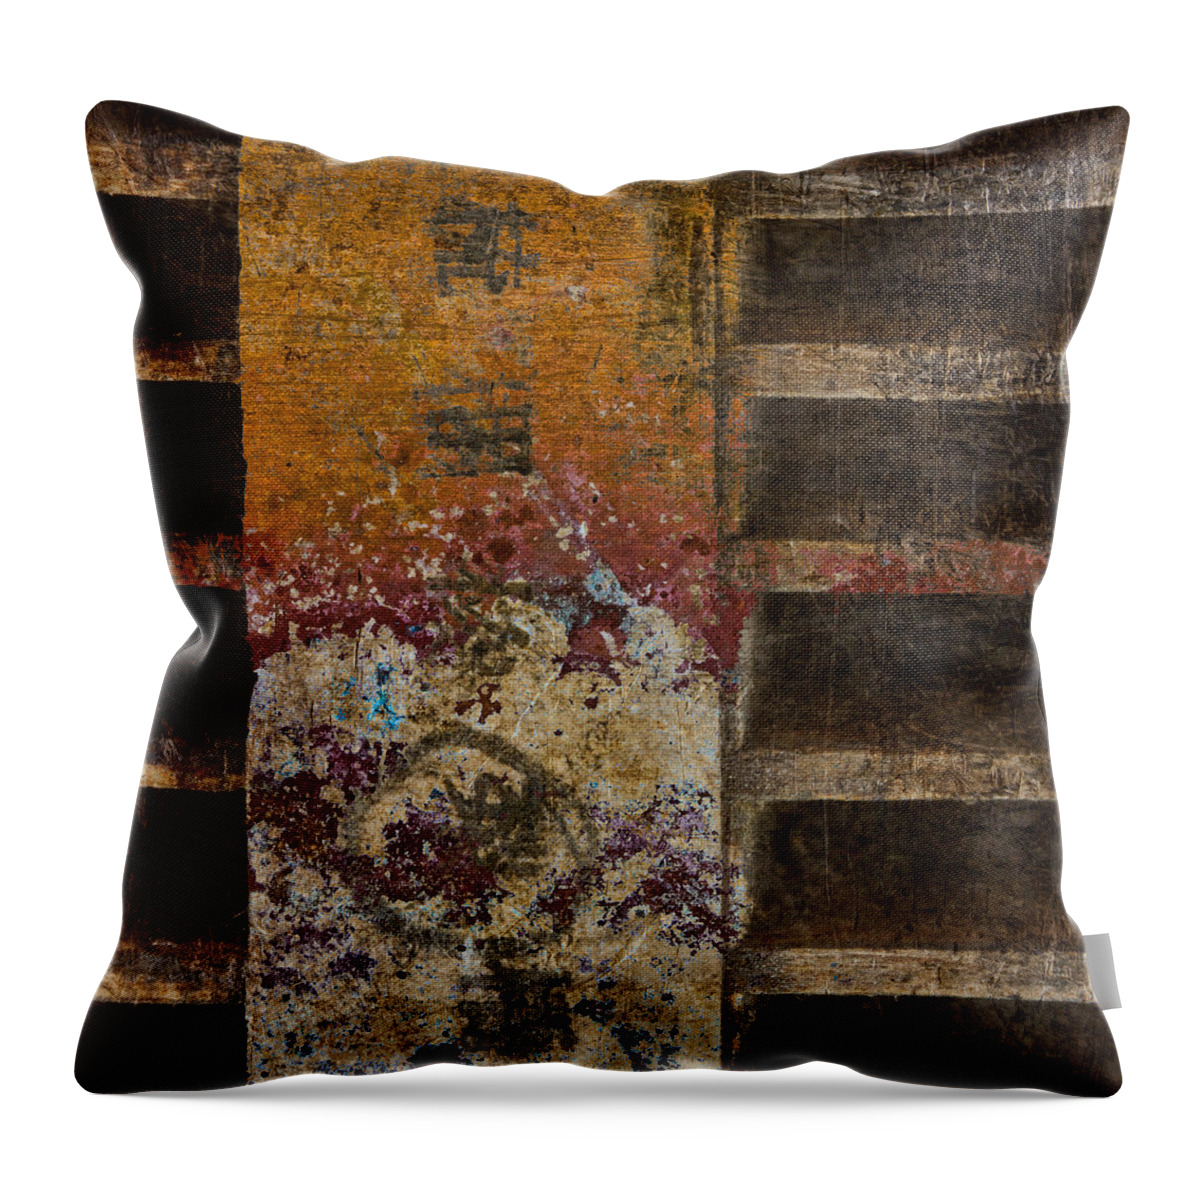 Japan Throw Pillow featuring the photograph Copperwood Square by Carol Leigh